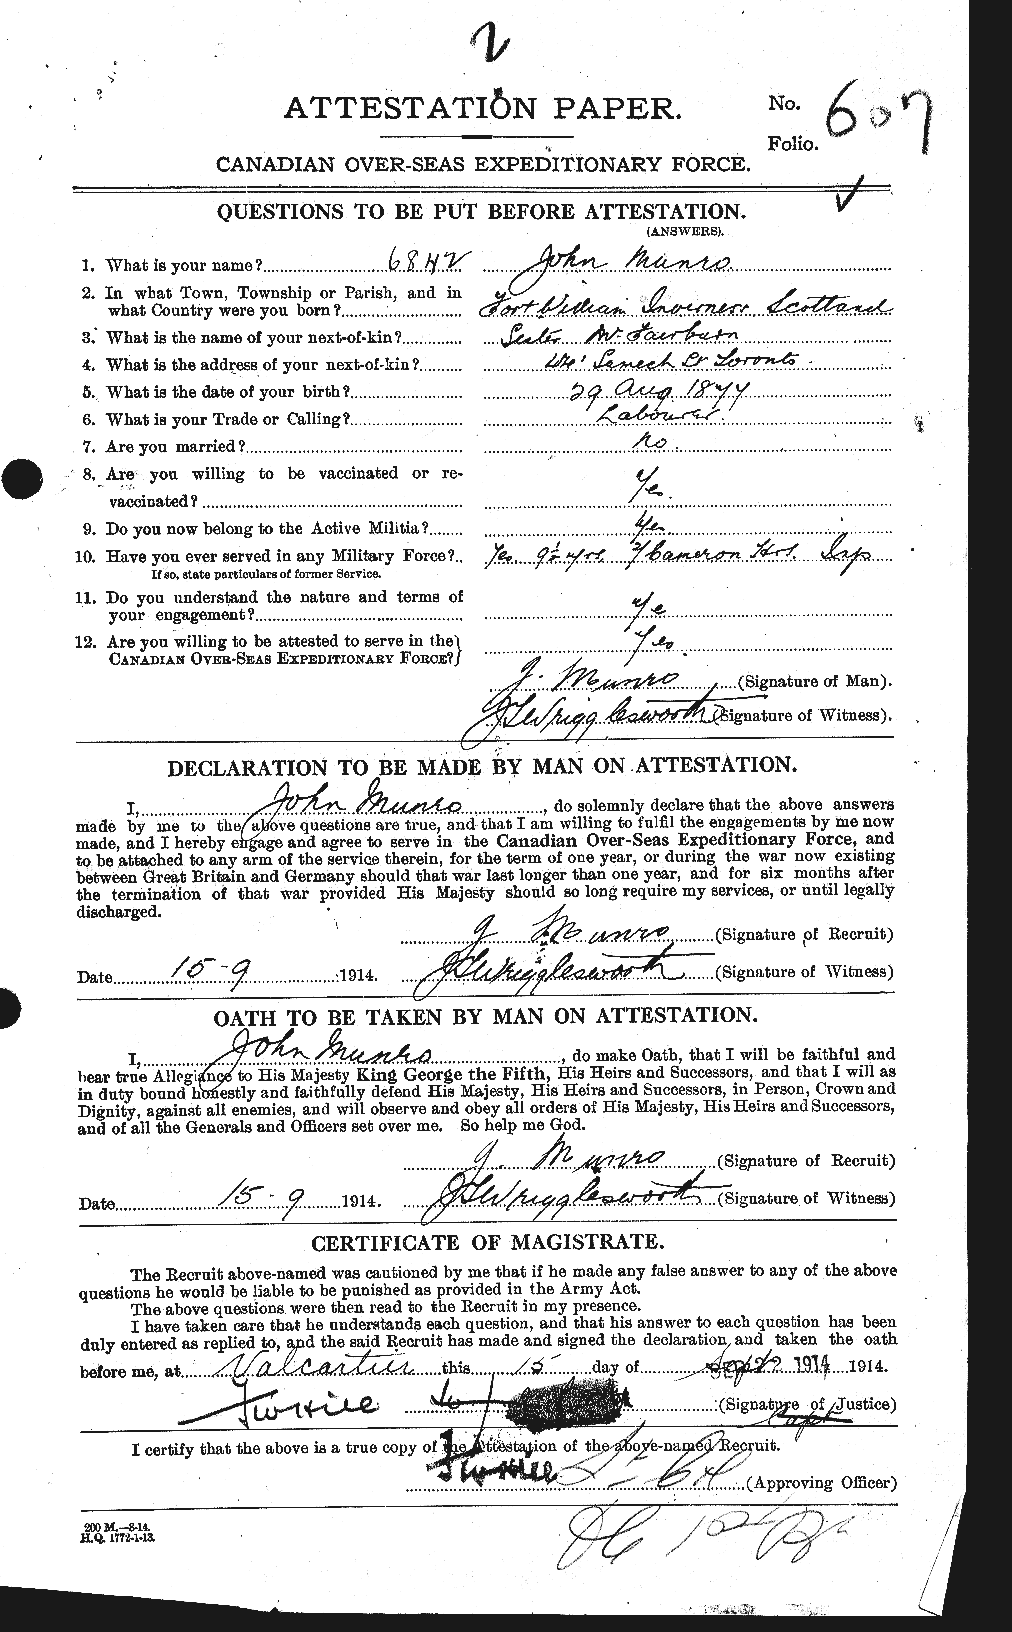 Personnel Records of the First World War - CEF 513942a